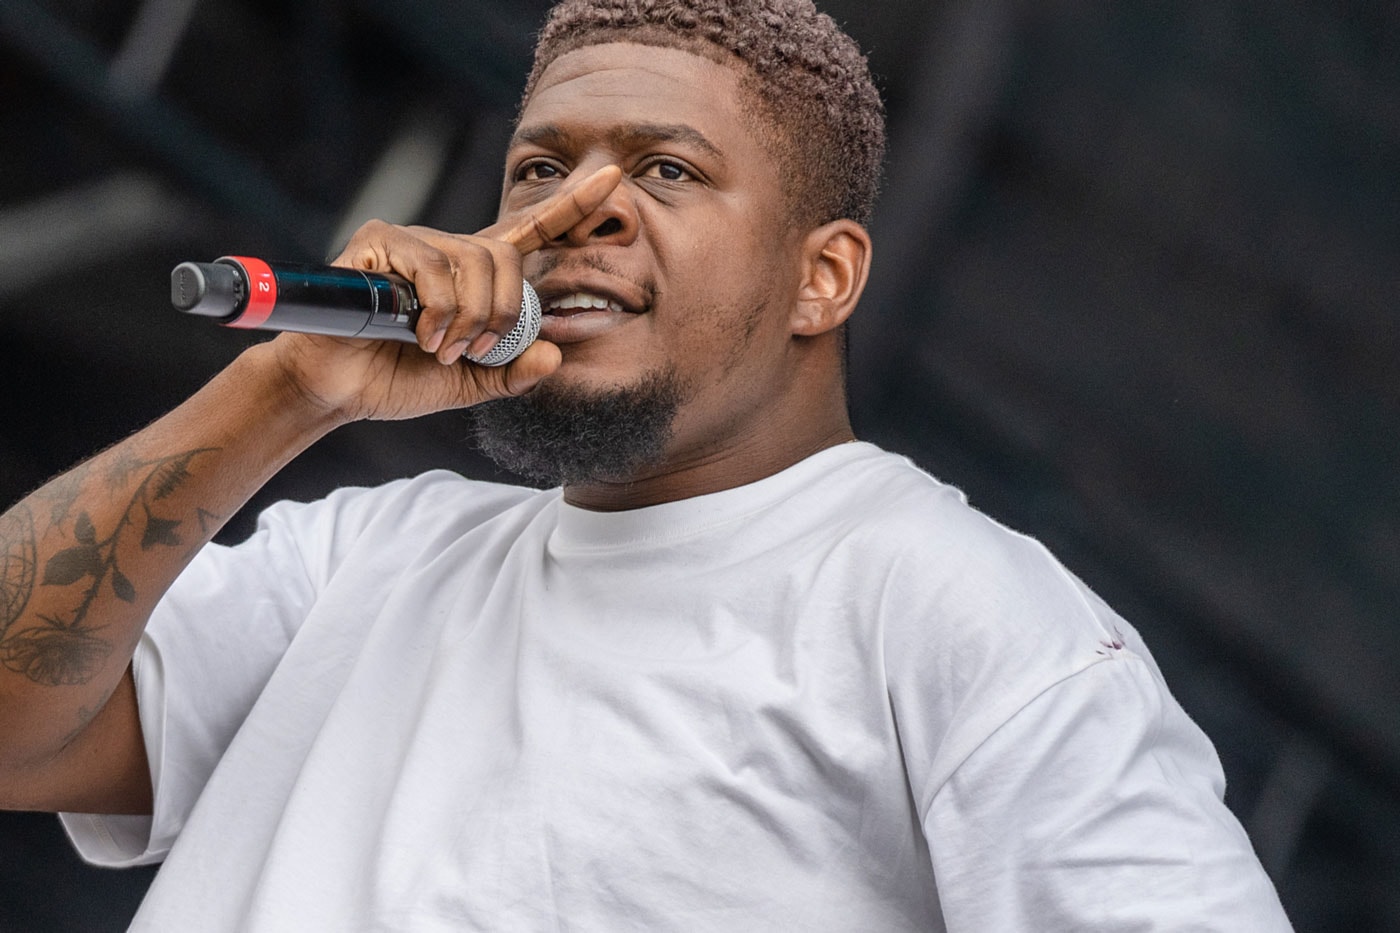 Mick Jenkins and The Other Side of Music